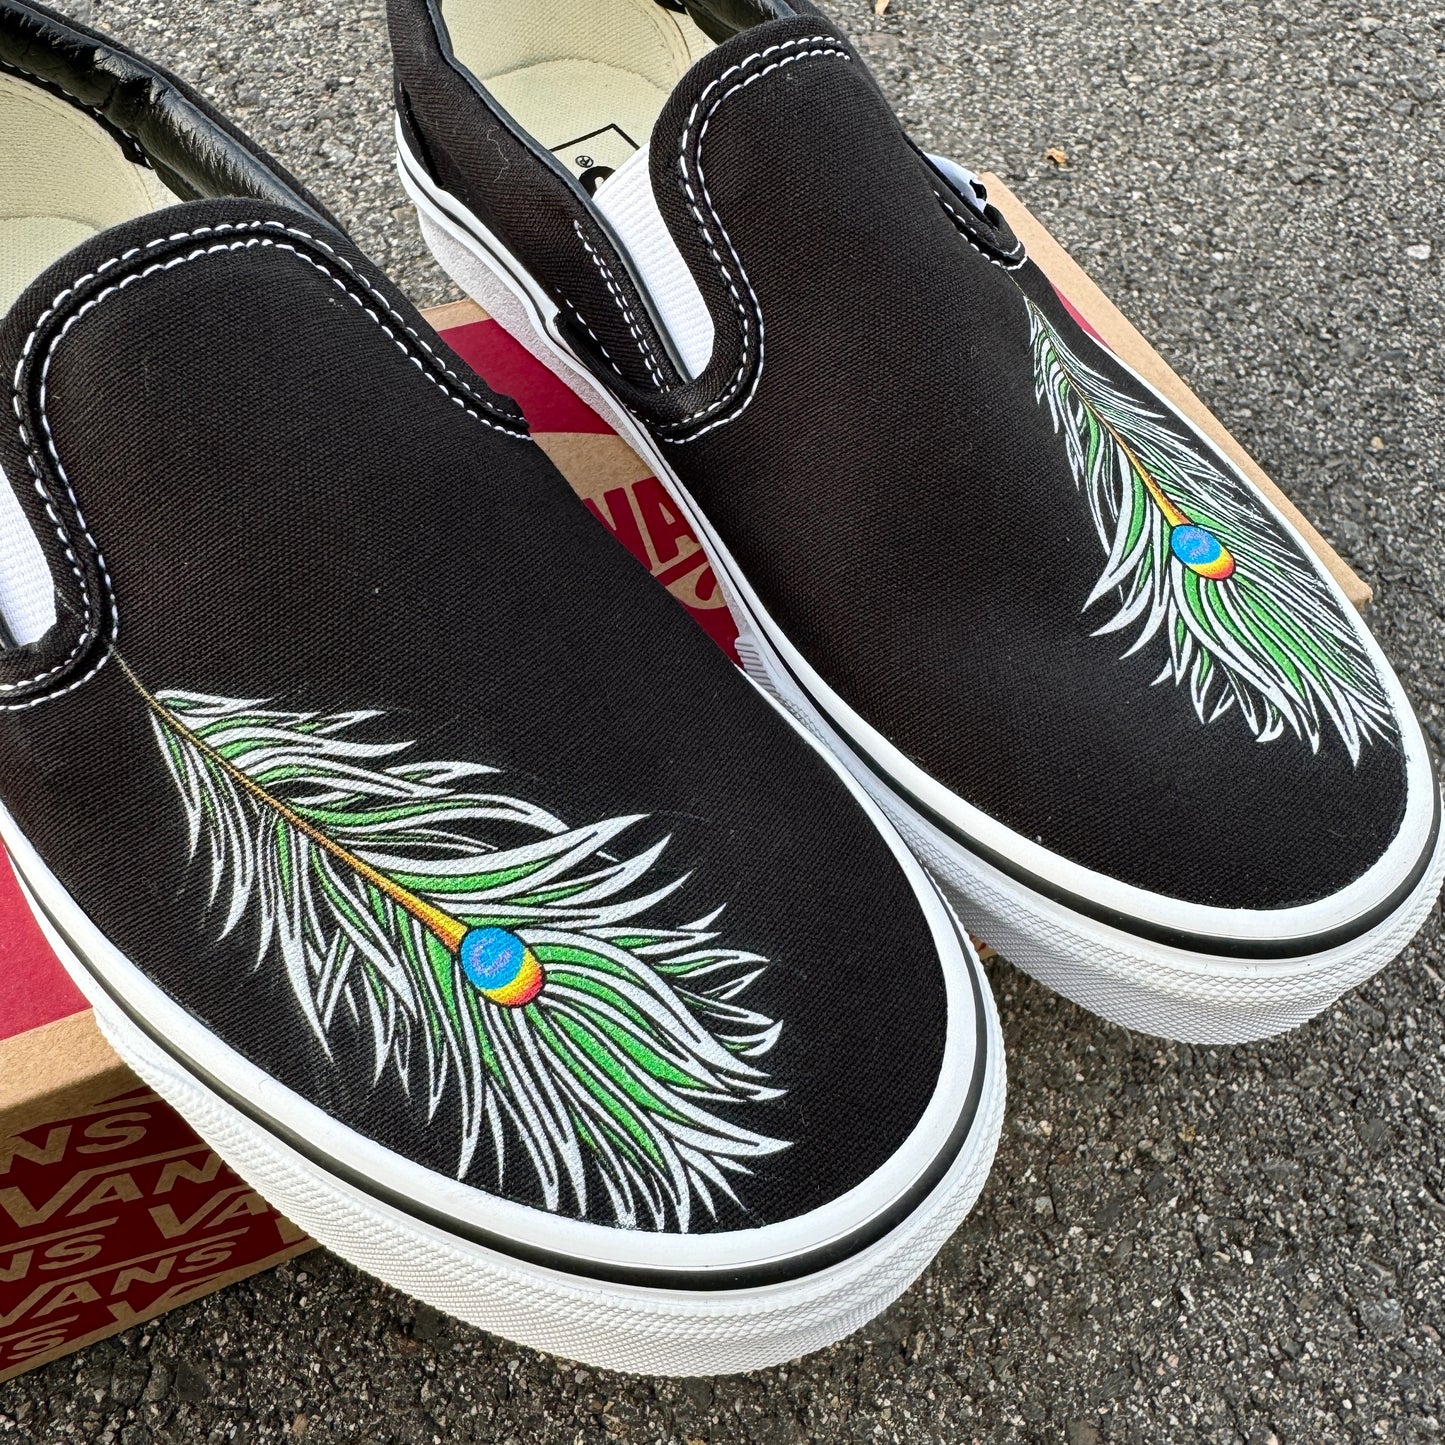 Peacock Feather Vans Slip On Shoes Unisex for Women and Men